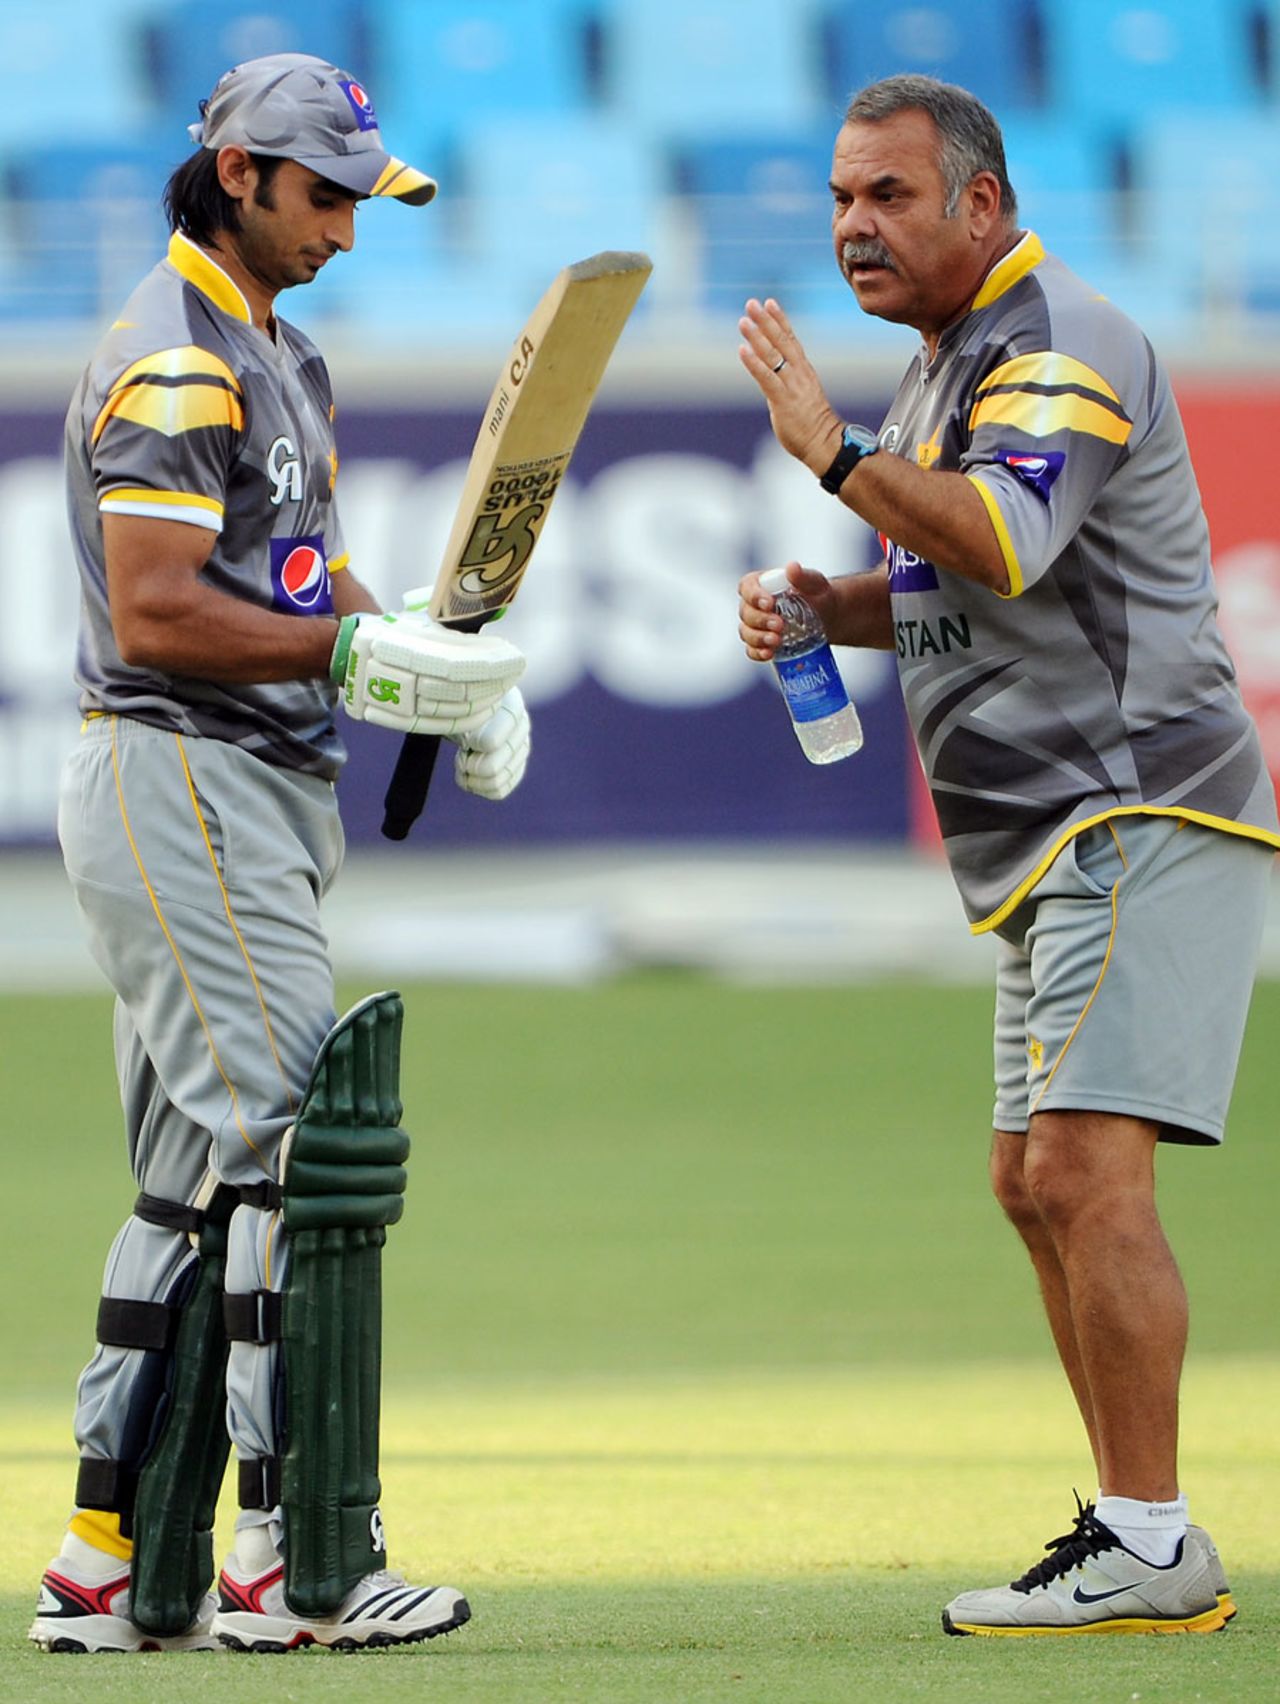 Imran Nazir gets some tips from coach Dav Whatmore at a training session, Dubai, September 8, 2012